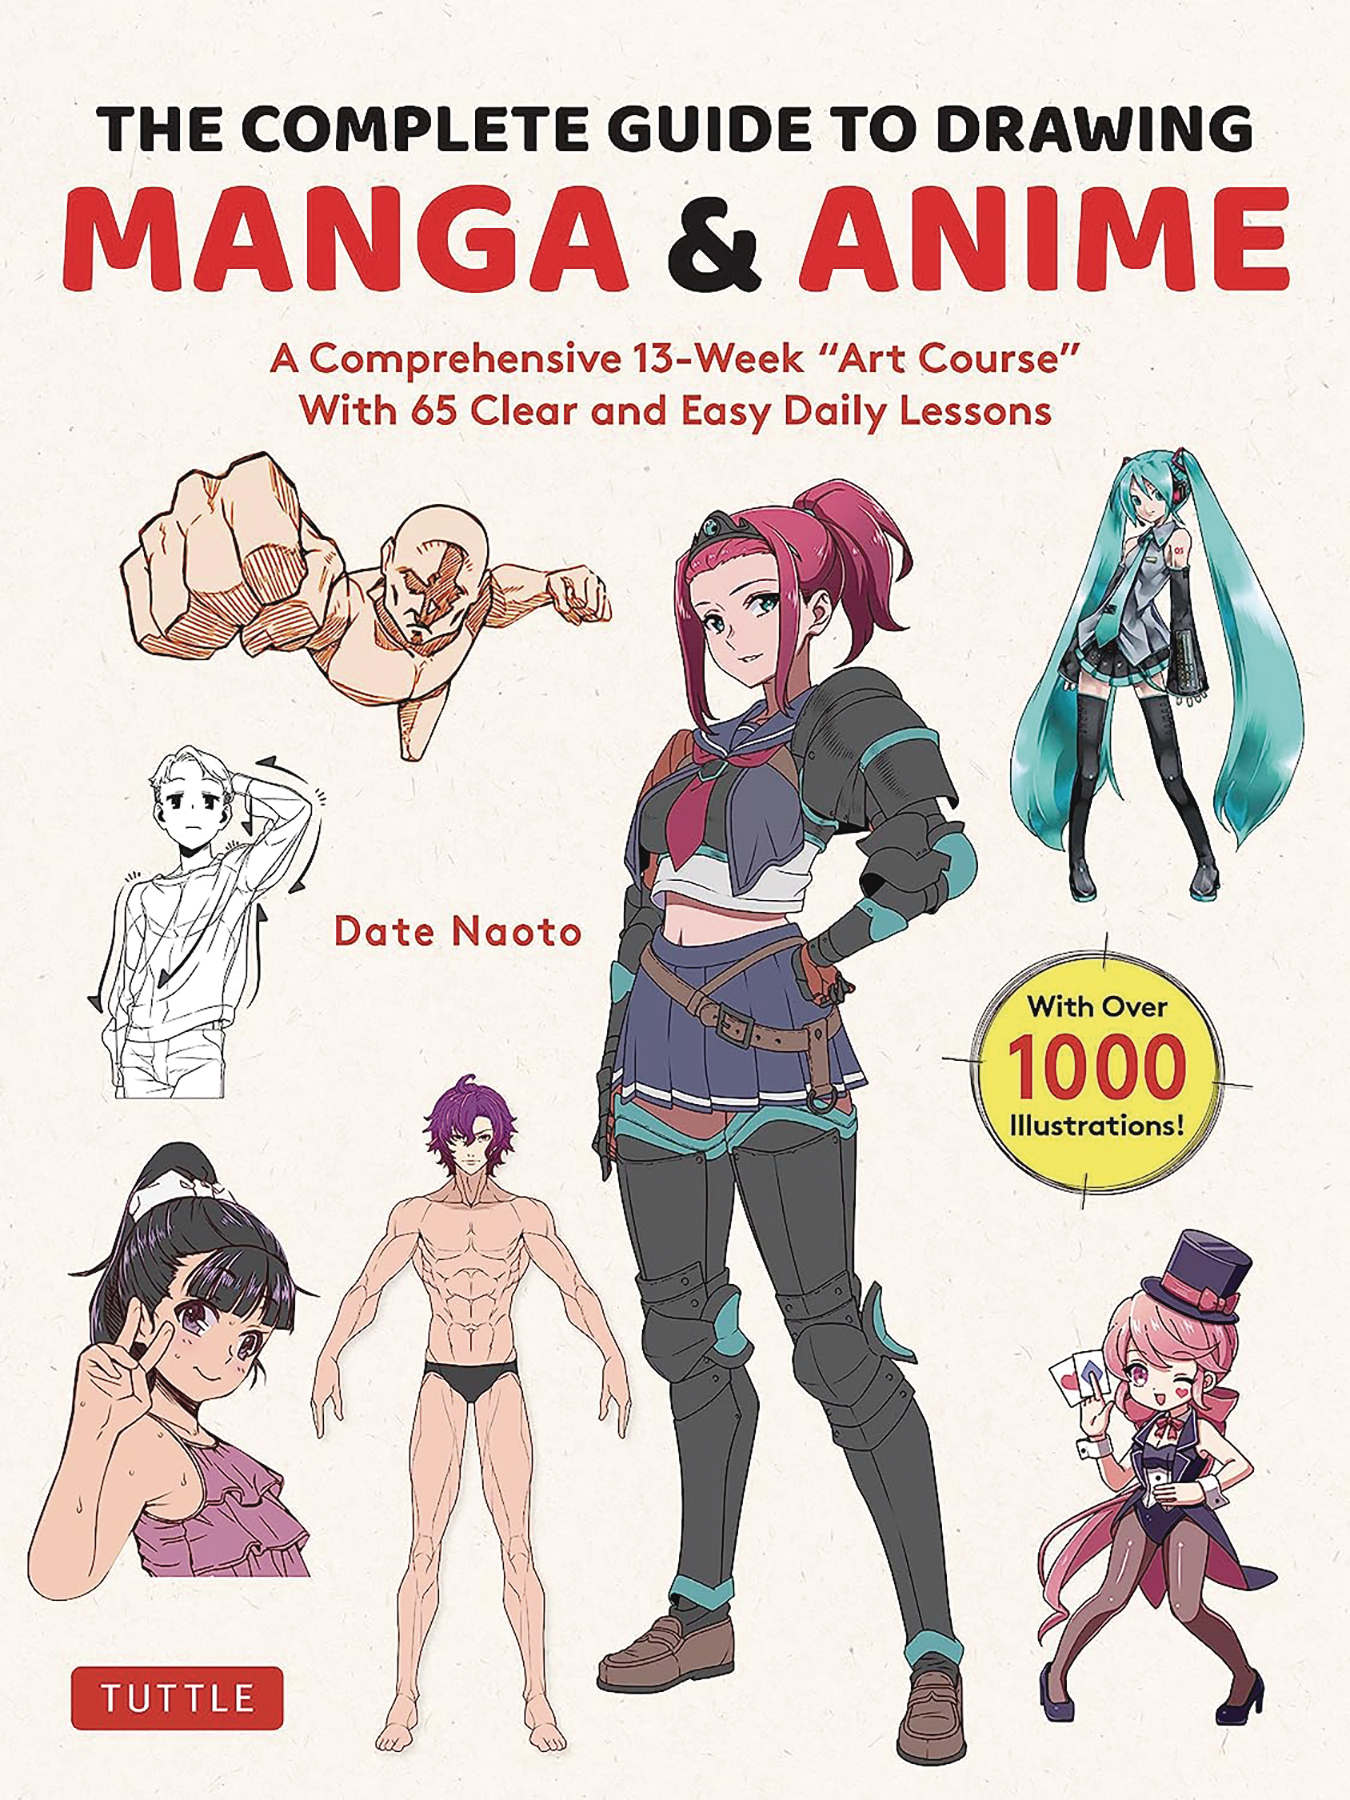 Complete Guide To Drawing Manga & Anime